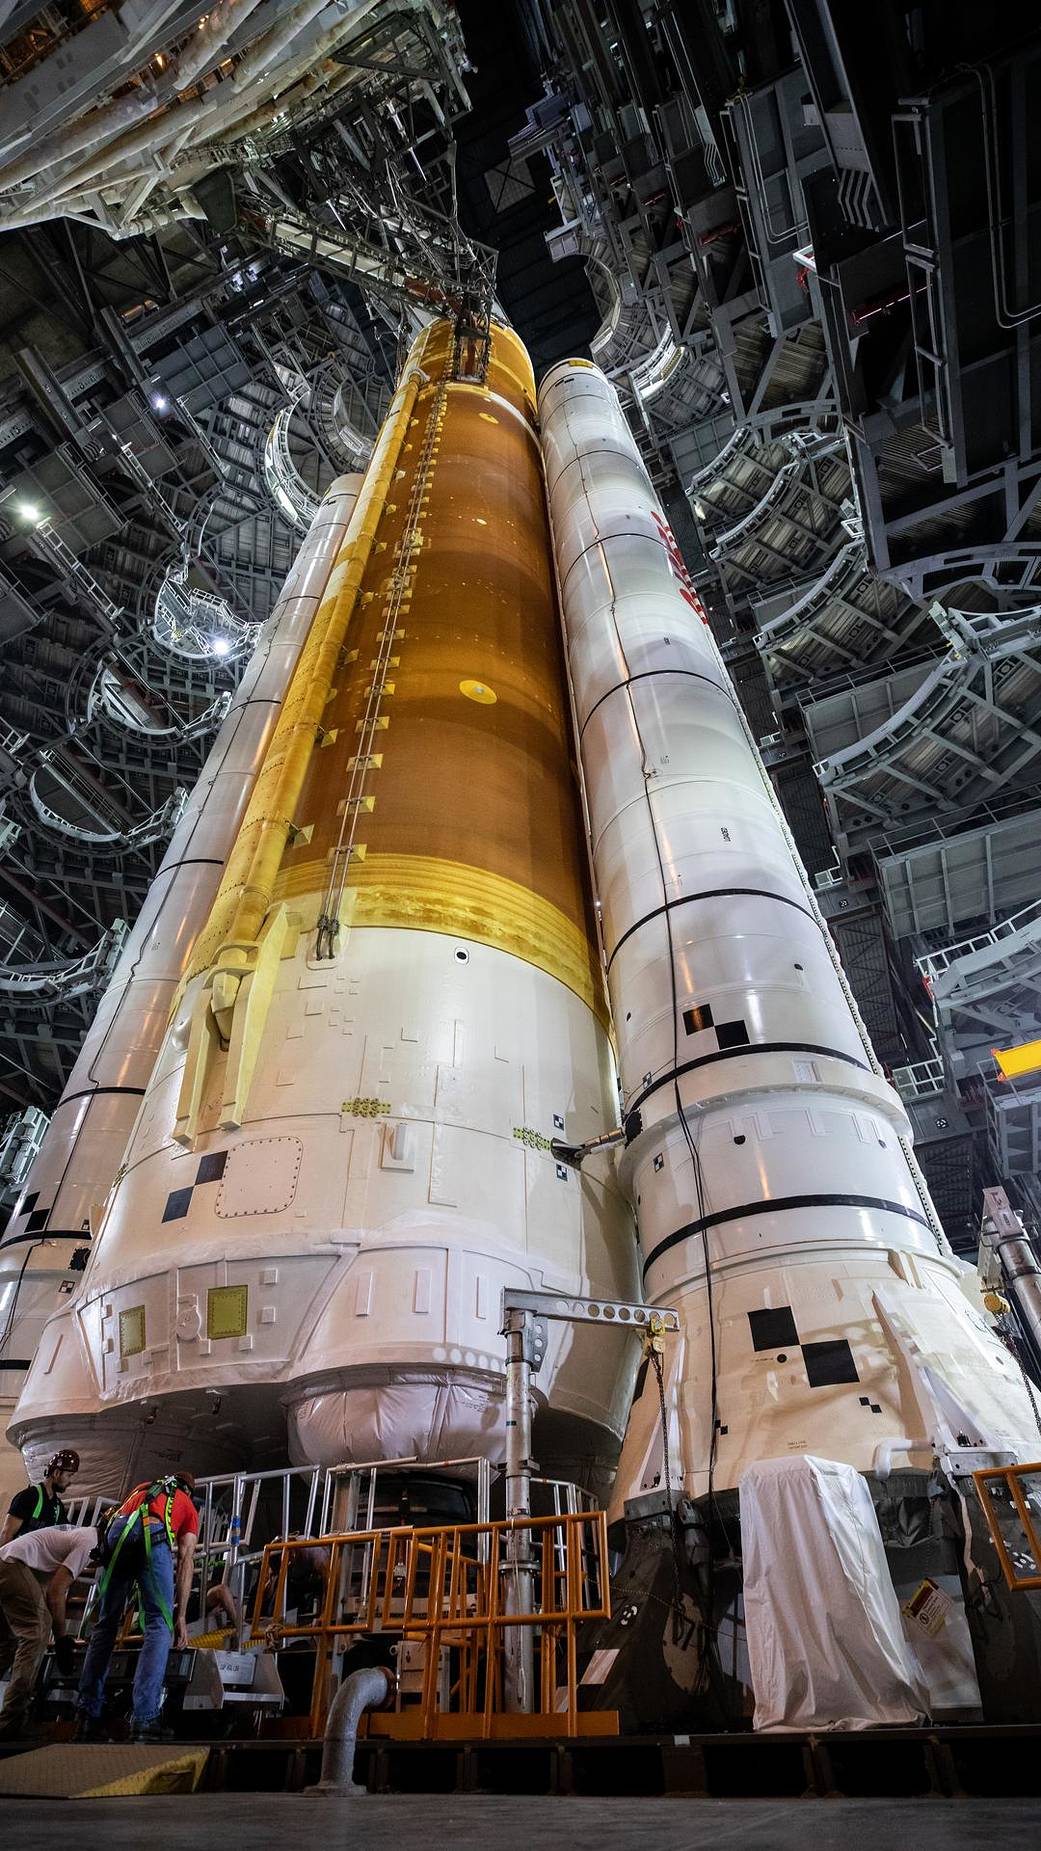 Small markings around the aft struts, which connect the twin solid rocket boosters to the core stage of SLS, are carefully watched during tanking.